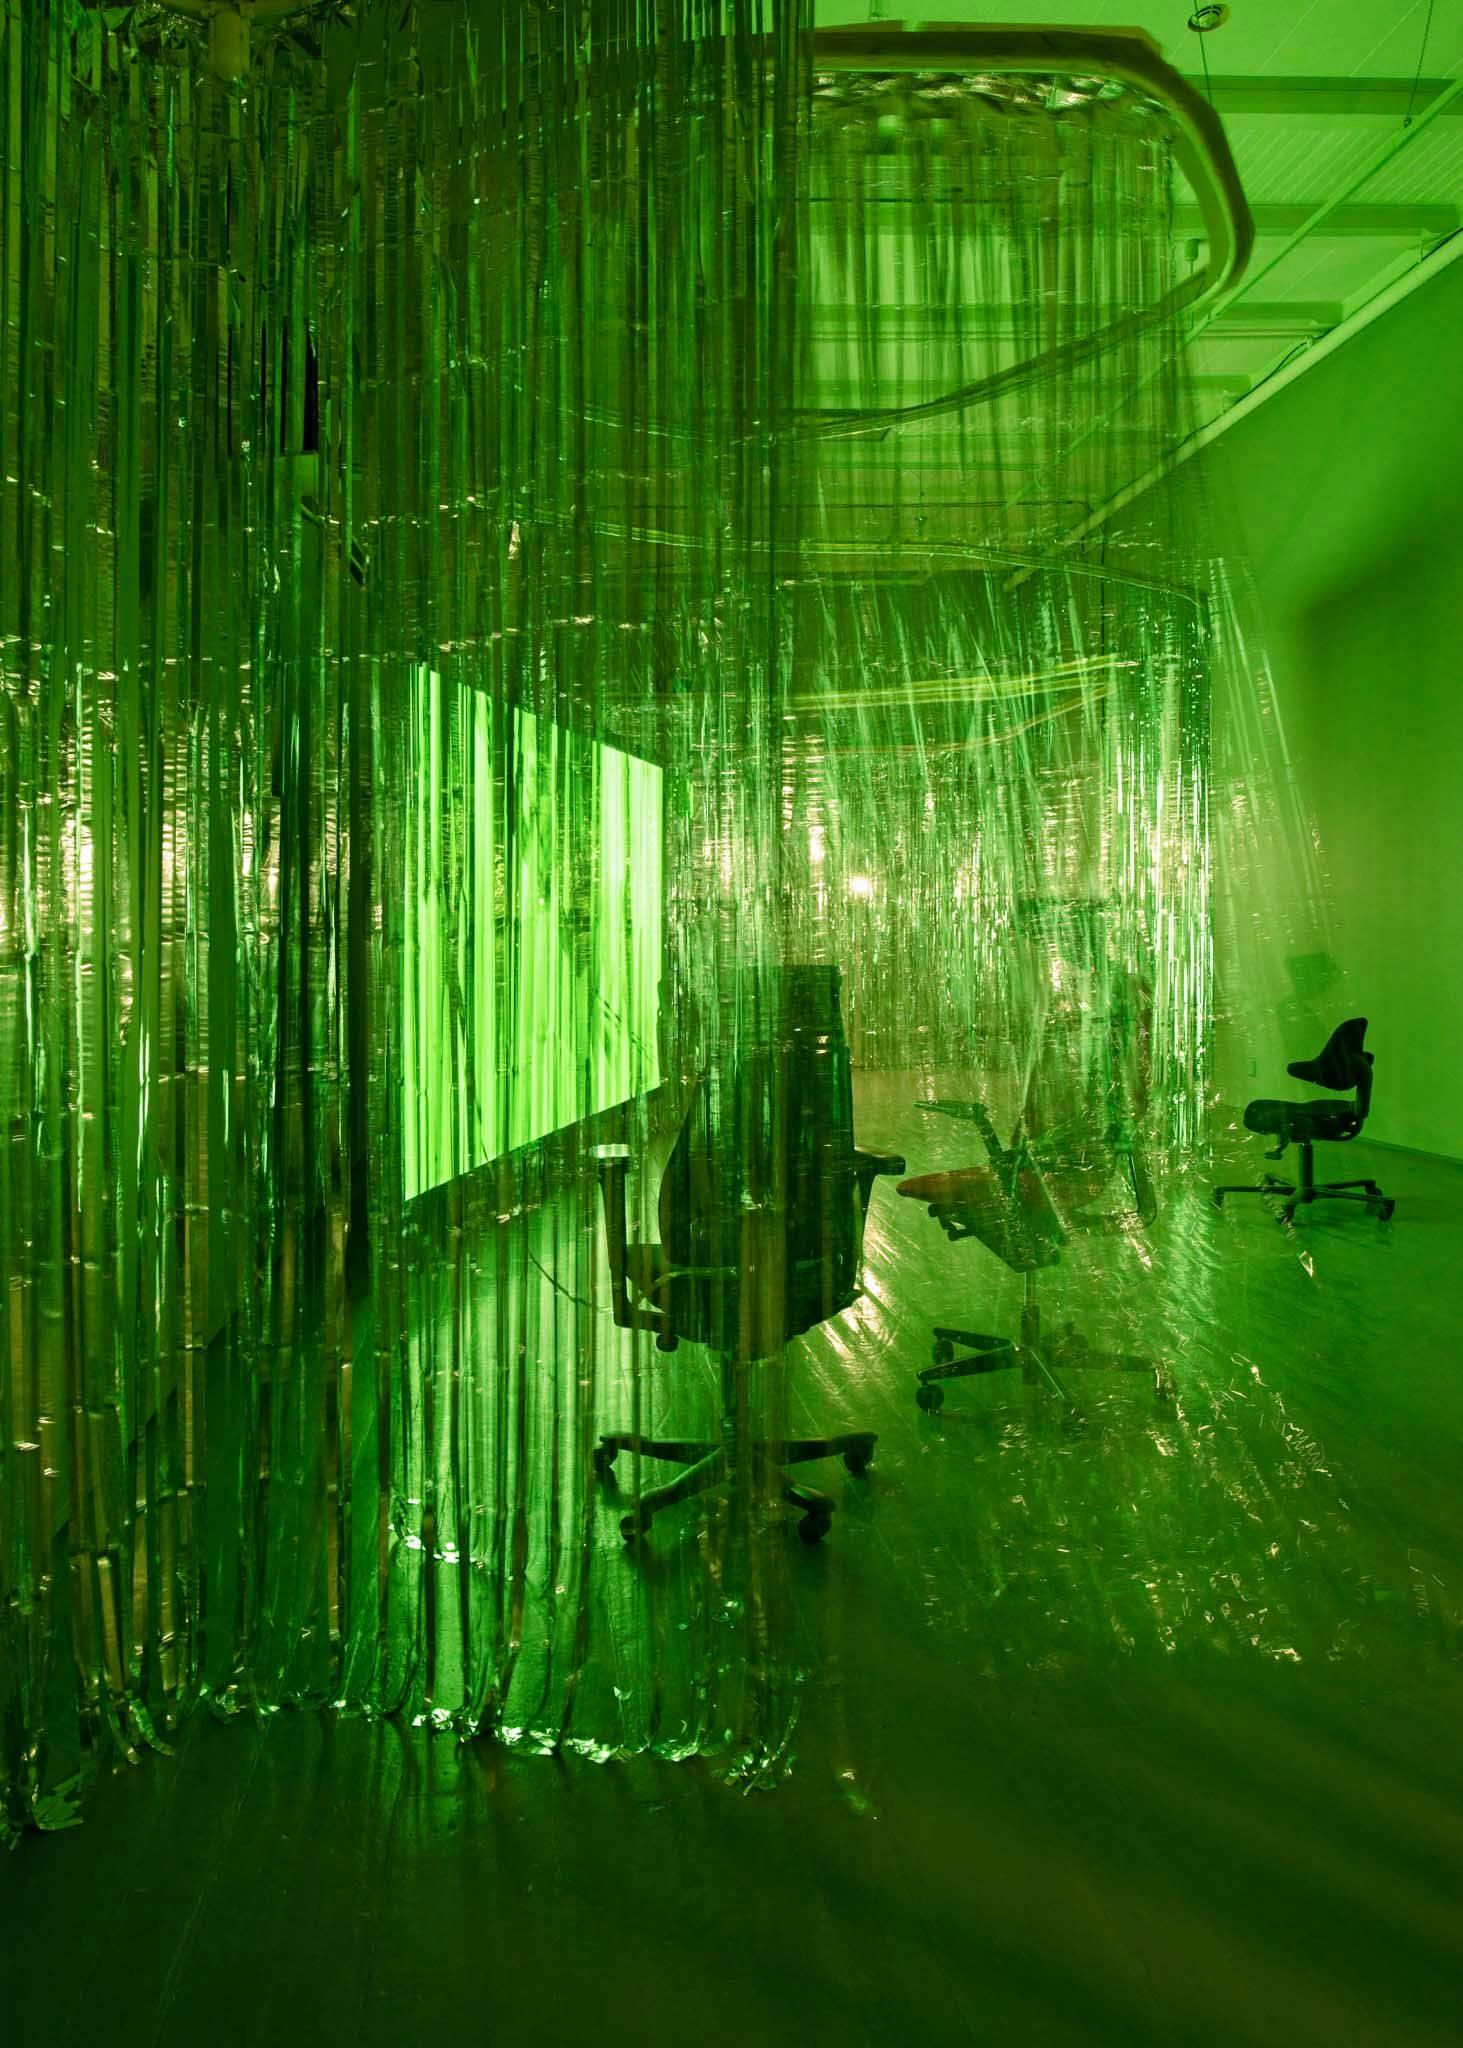 Office chairs are surrounded by foil curtains in a gallery space. Green light from a projection screen lights up the space.